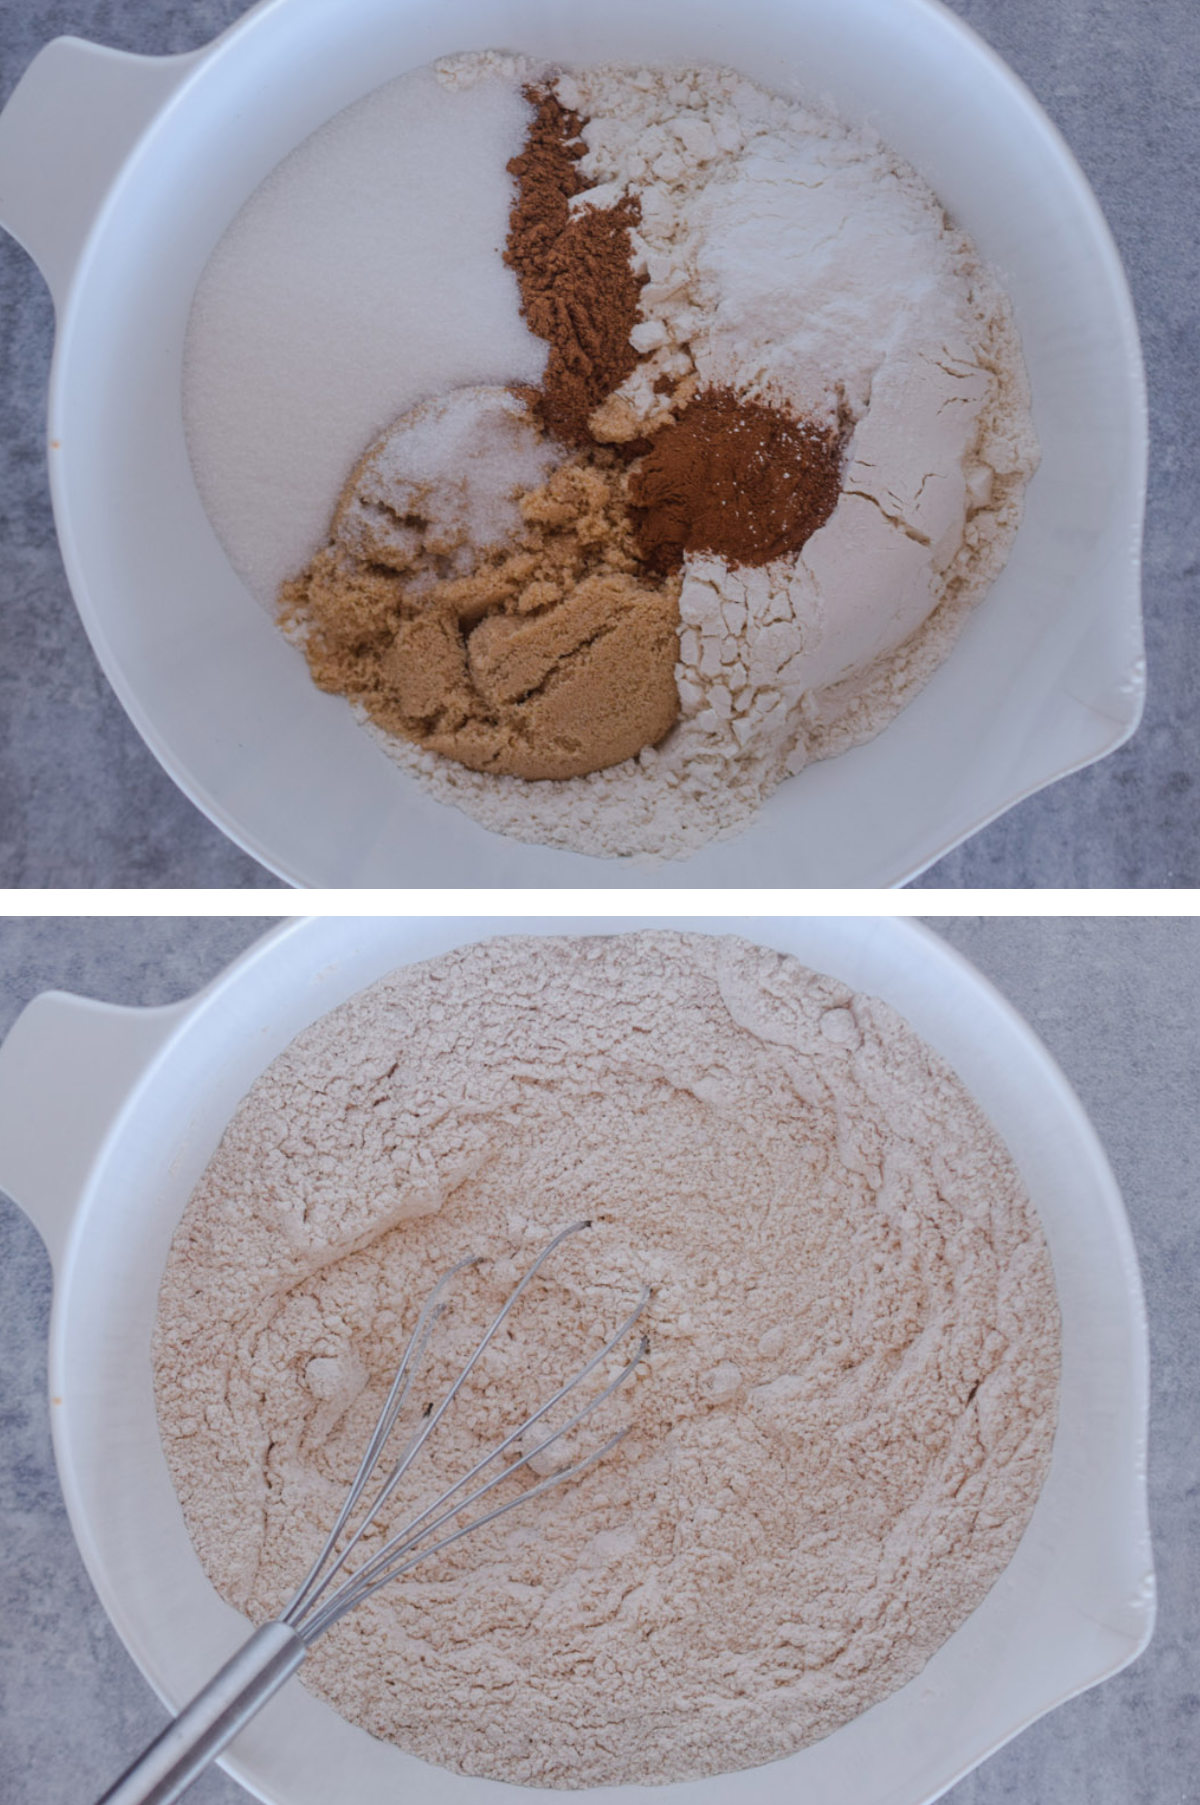 Two overhead images in one: 1. All the dry ingredients are added to a large white bowl. 2. All ingredients are mixed. 